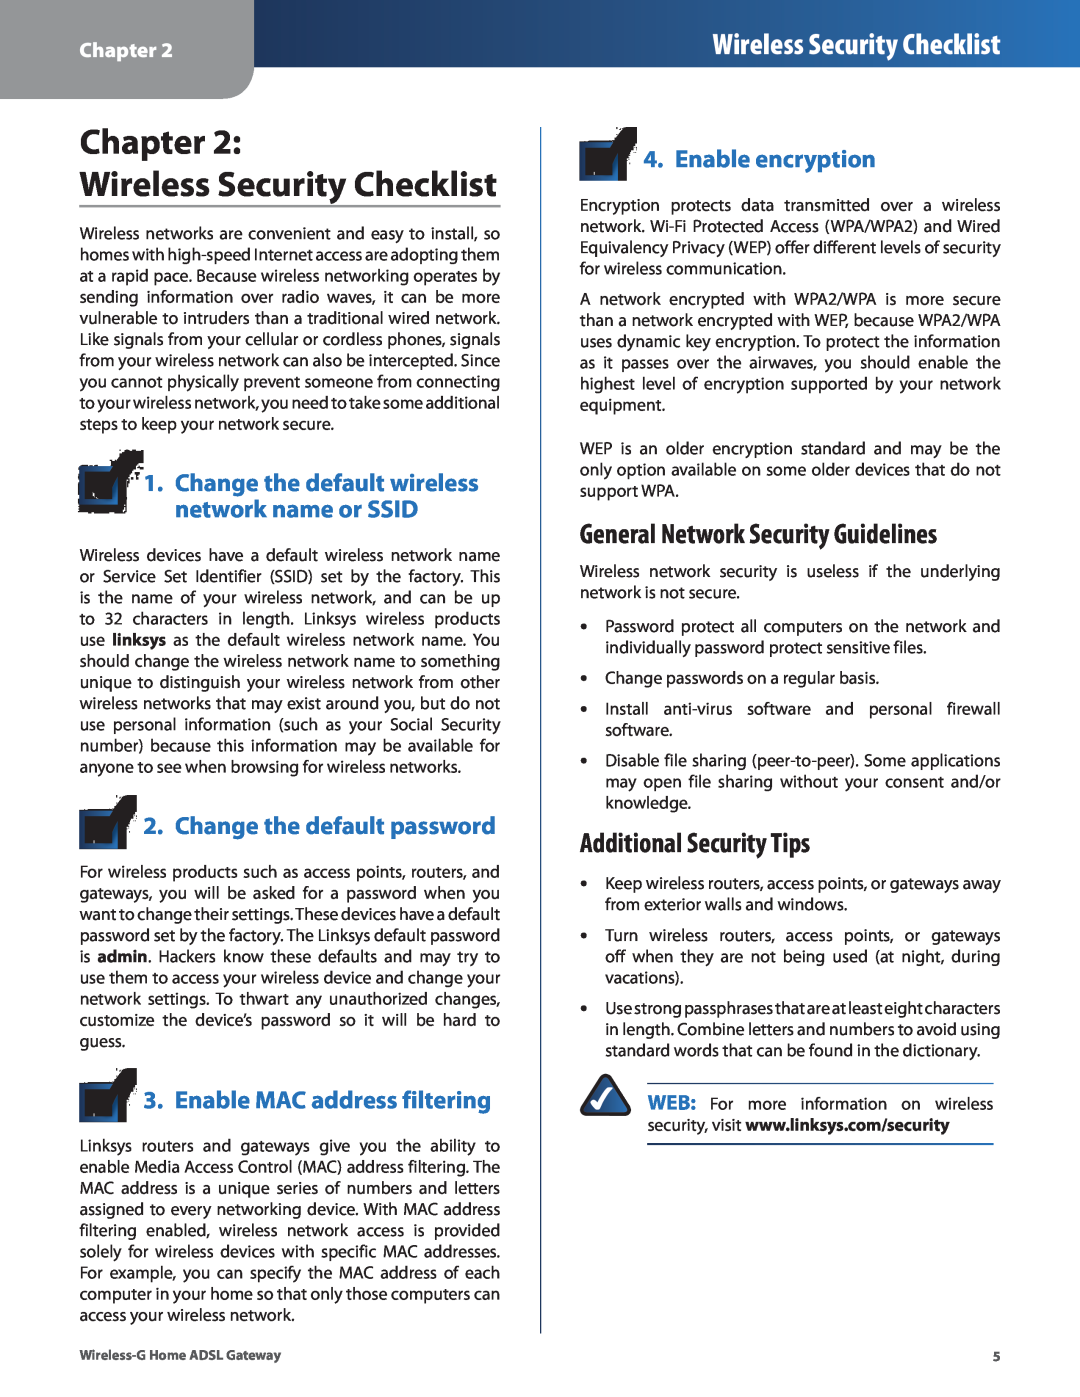 Linksys WAG200G manual Chapter Wireless Security Checklist, General Network Security Guidelines, Additional Security Tips 